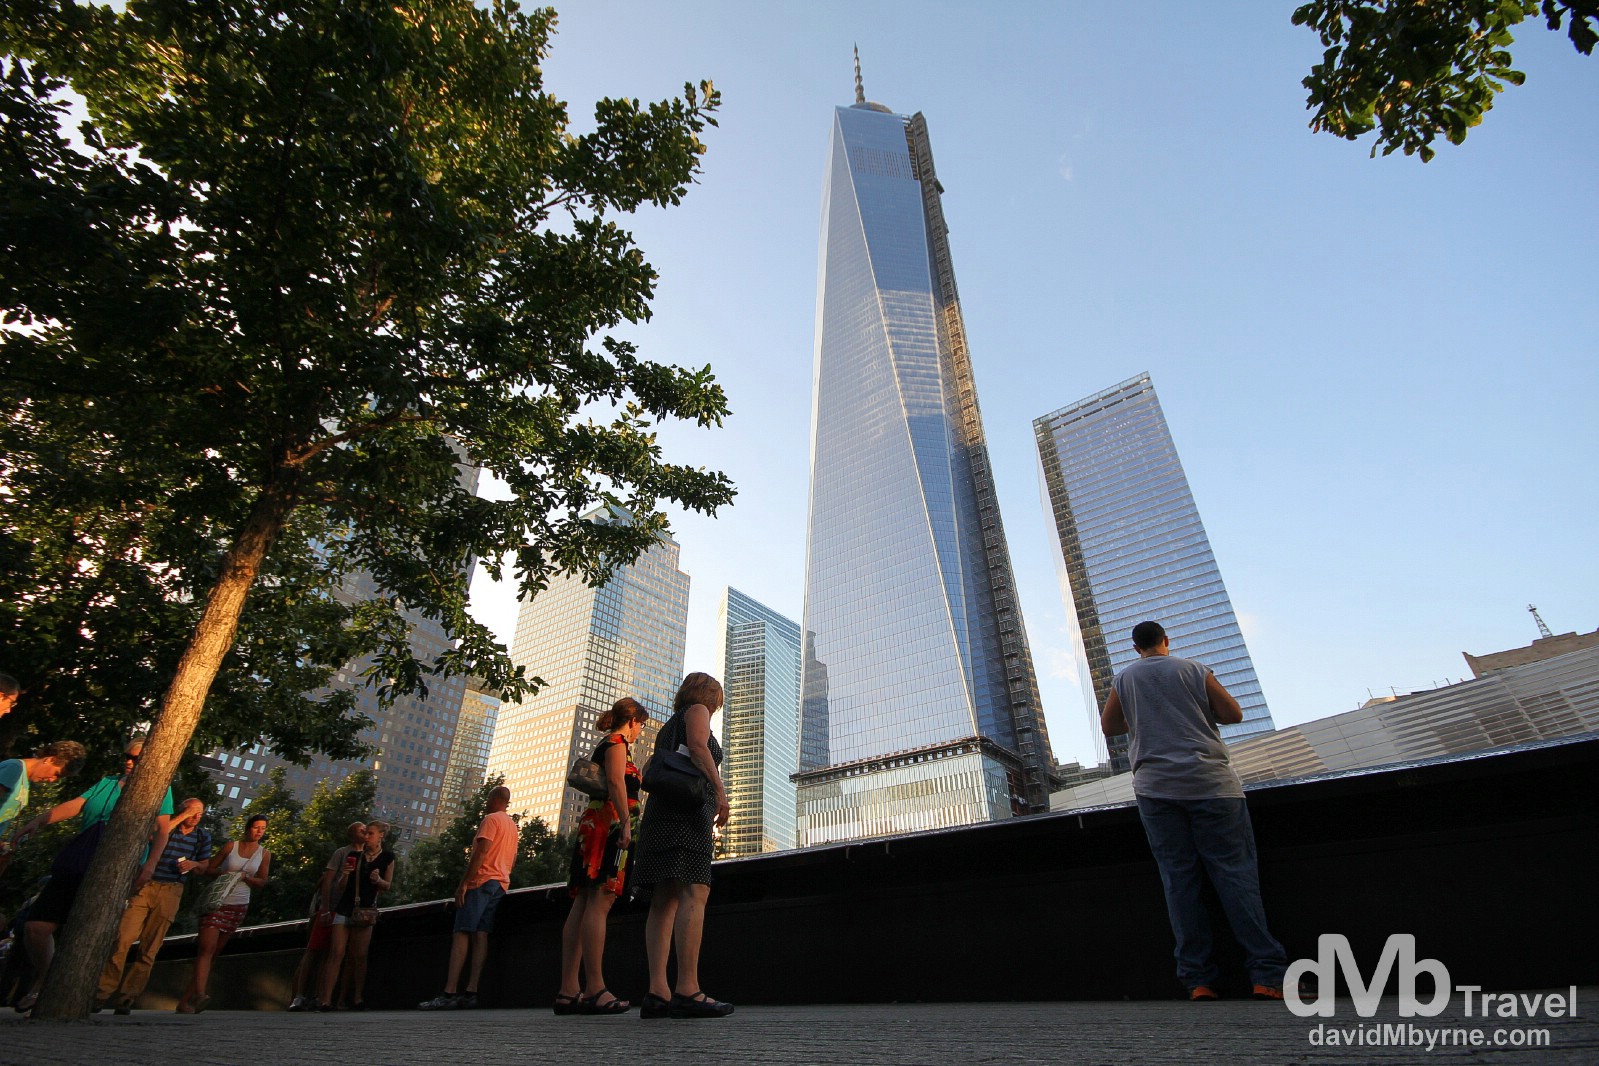 Towers of the rebuilt World Trade Center towering over the The 9/11 Memorial, lower Manhattan, New York City, USA. July 14th 2013.